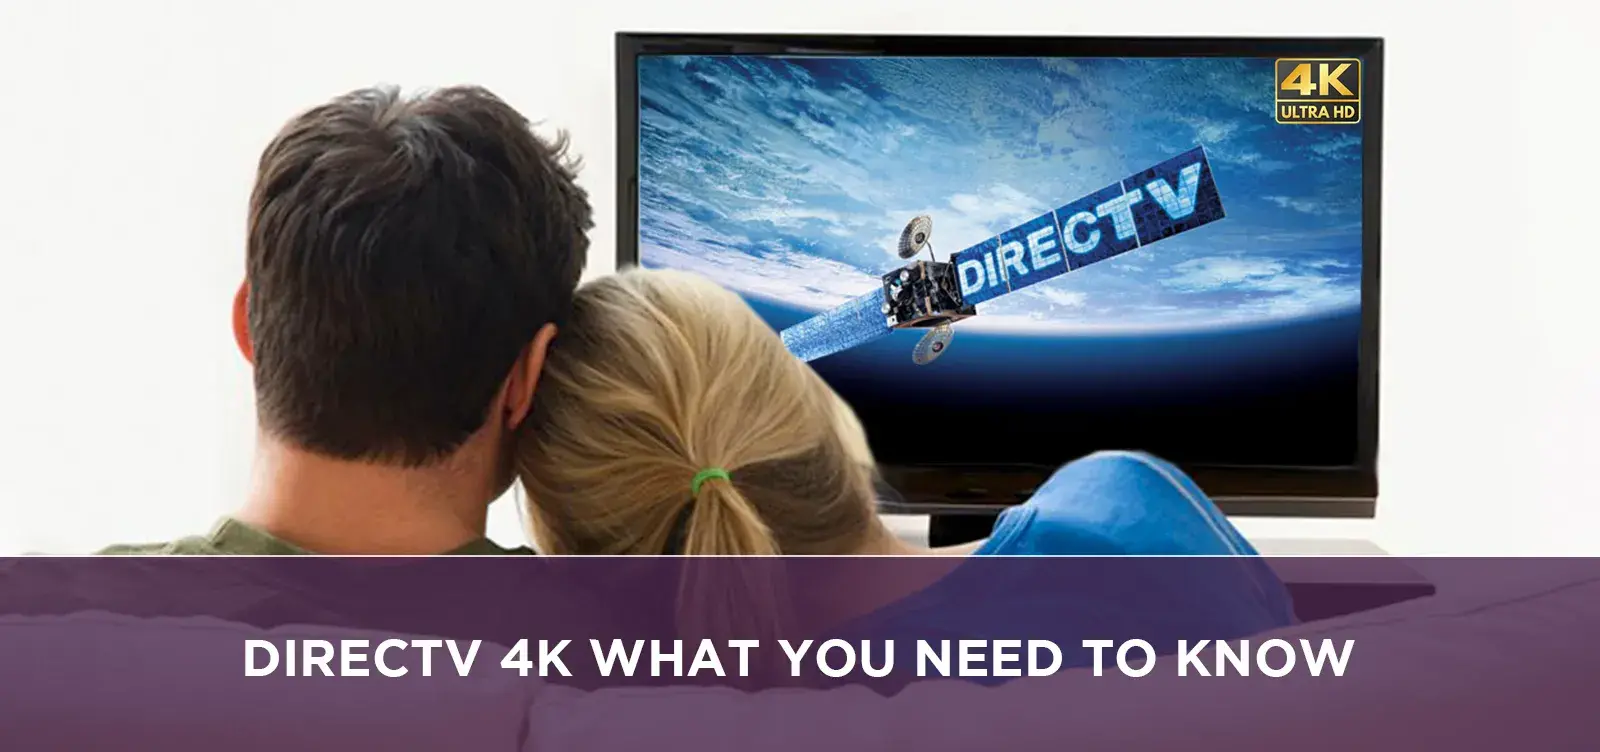 DIRECTV 4K: What You Need to Know